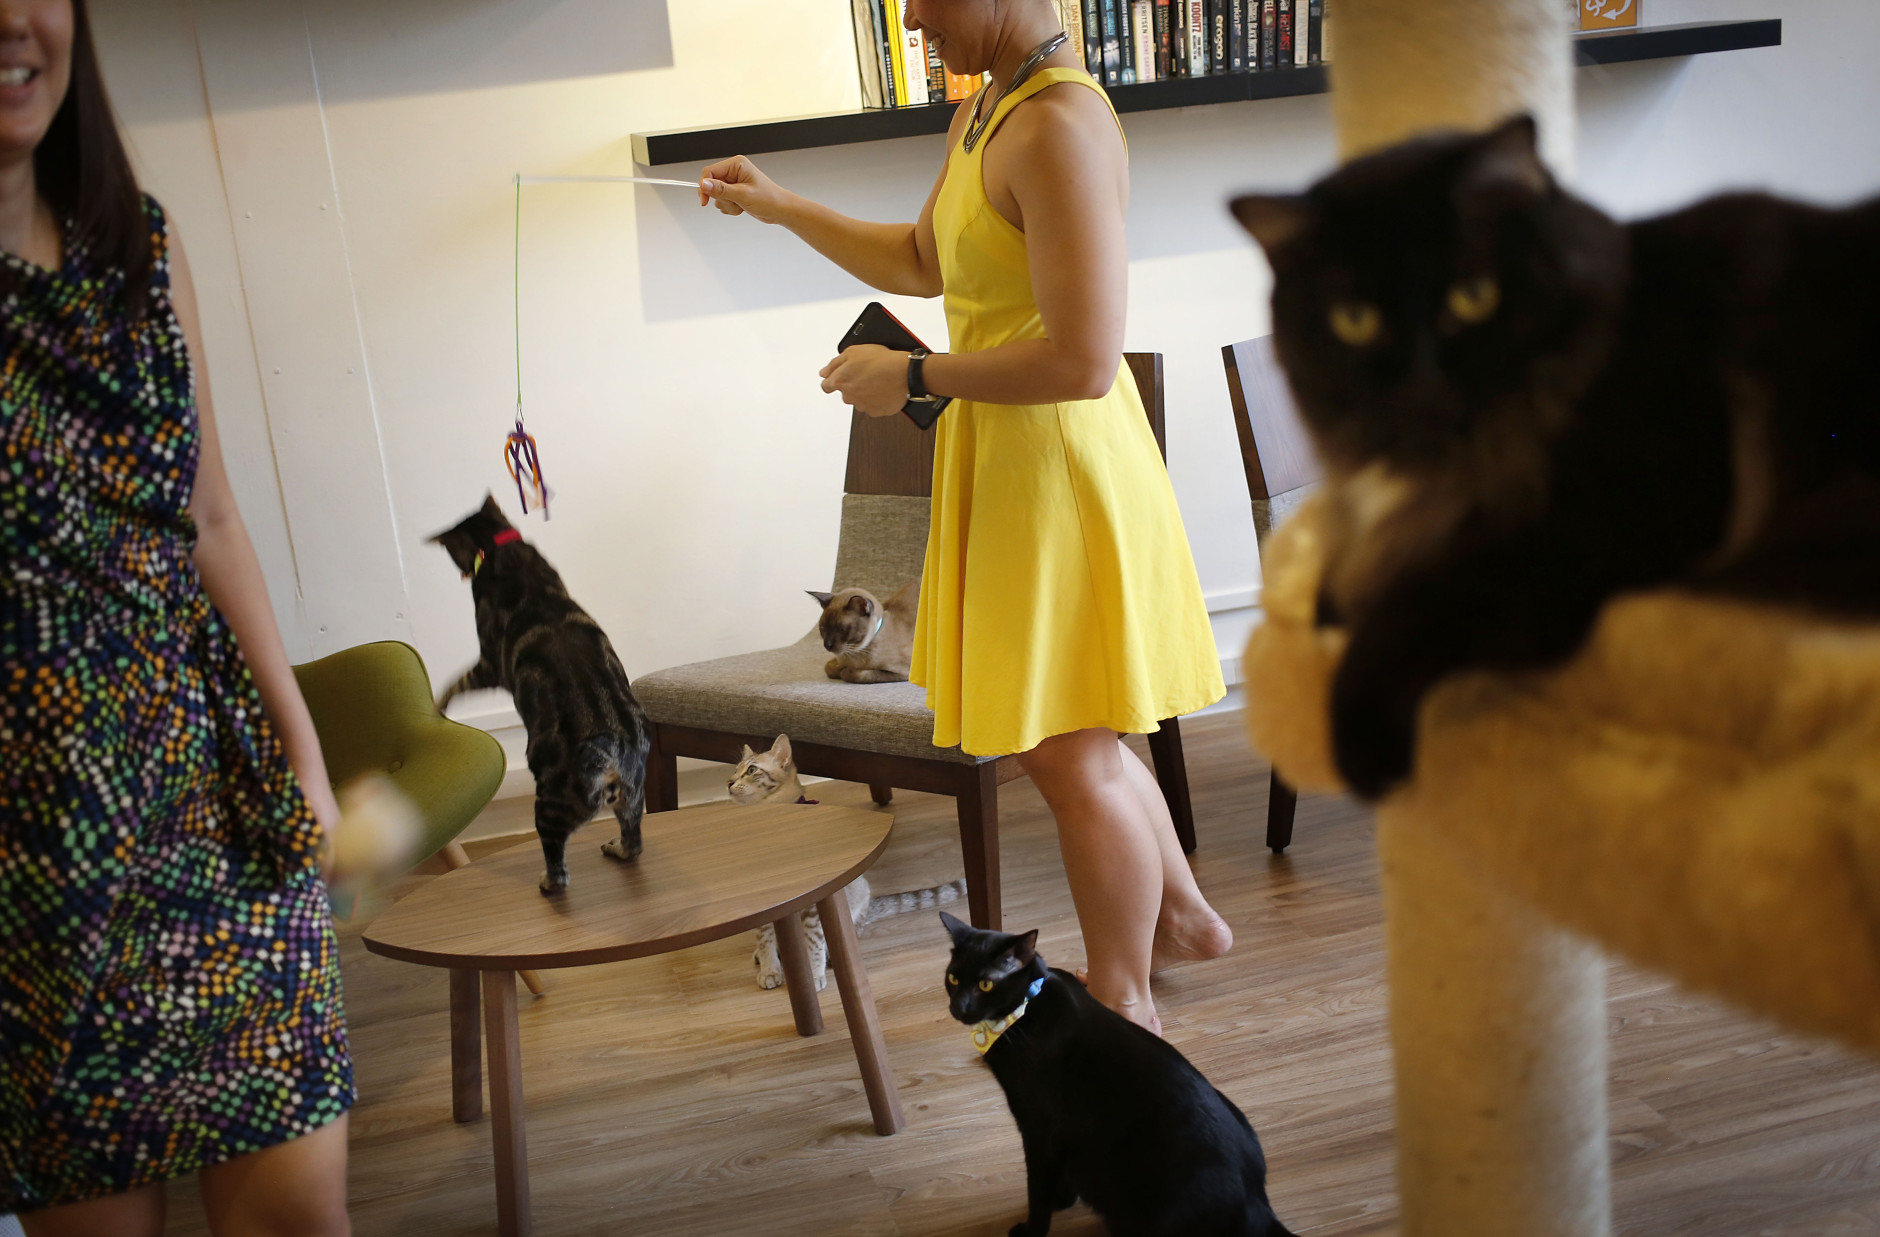 Customers play with cats at the Cat Cafe, the first of its kind in Singapore on Monday, Dec. 23, 2013. This cafe is home to thirteen cats which have been rescued from the streets, and customers who visit can enjoy a cup of coffee while they mingle with the feline inhabitants.  This is an effort by the cafe owners who are both cat lovers, to educate and inform the public about cats. (AP Photo/Wong Maye-E)